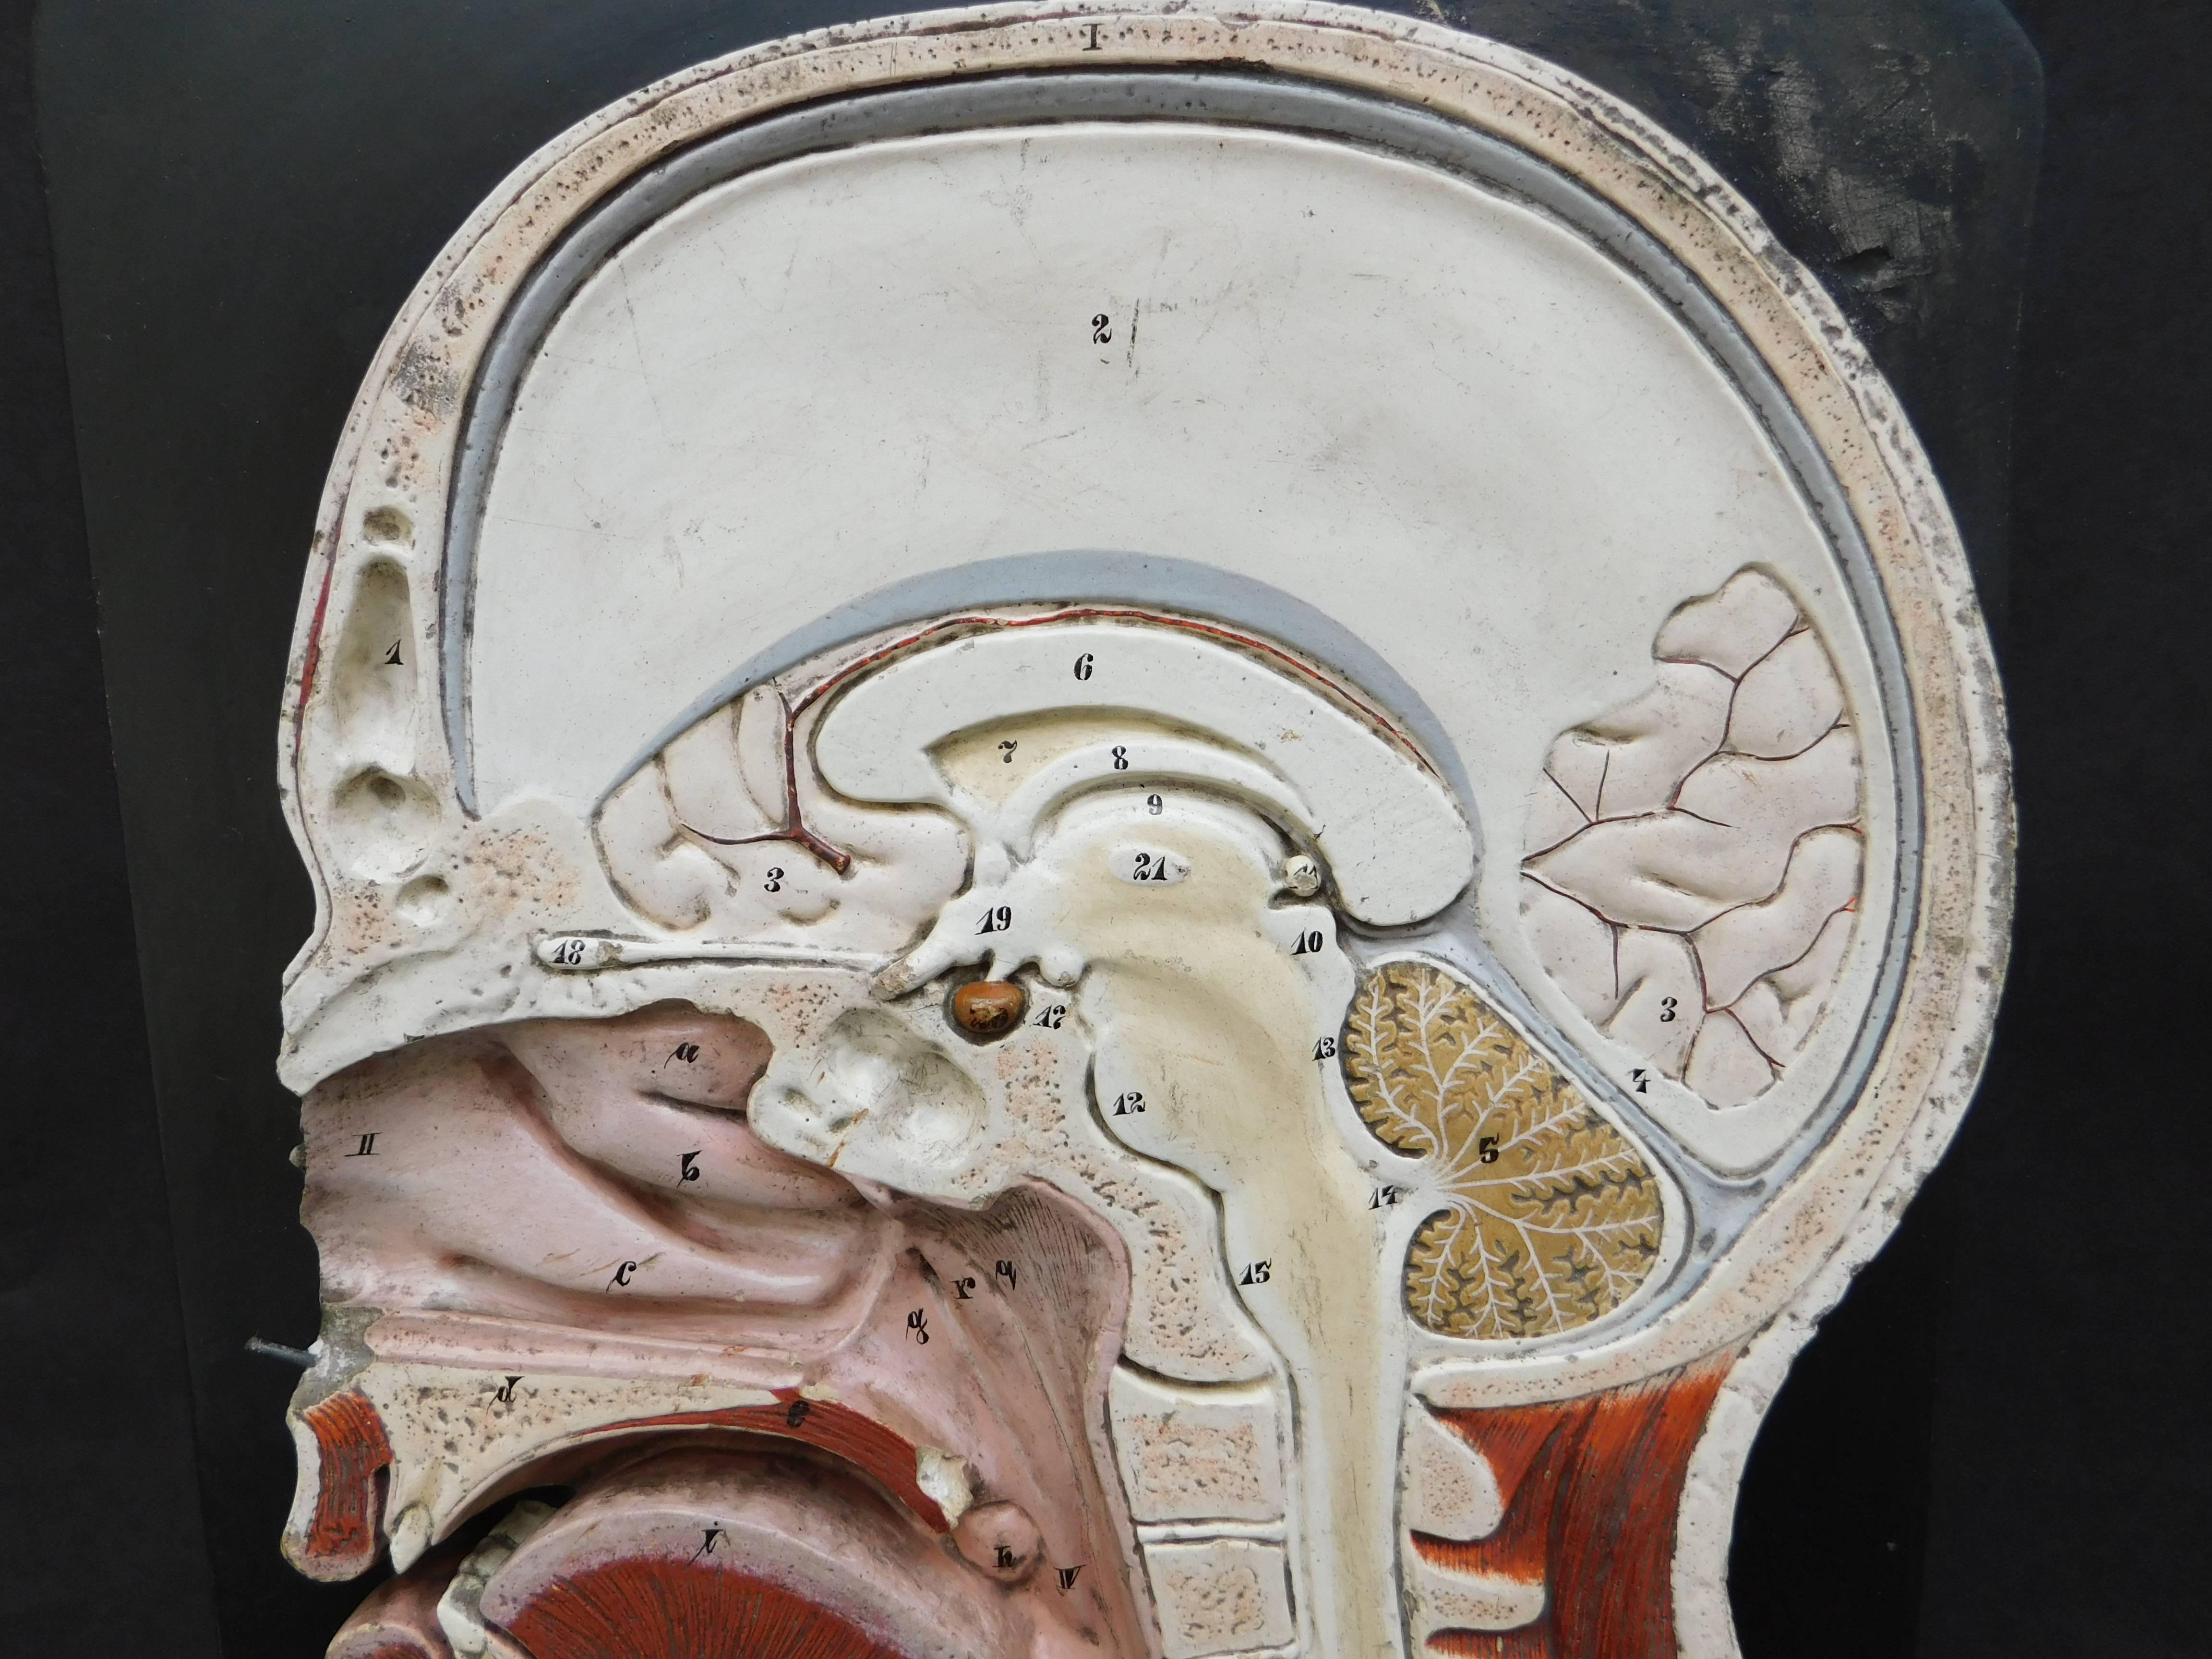 Anatomic didactic model of the cross section of the head by Bock-Steger Lips of Leipzig, Germany, circa 1890. Polychrome painted plaster. Impressed signature in plaster as well as the original brass name plate.